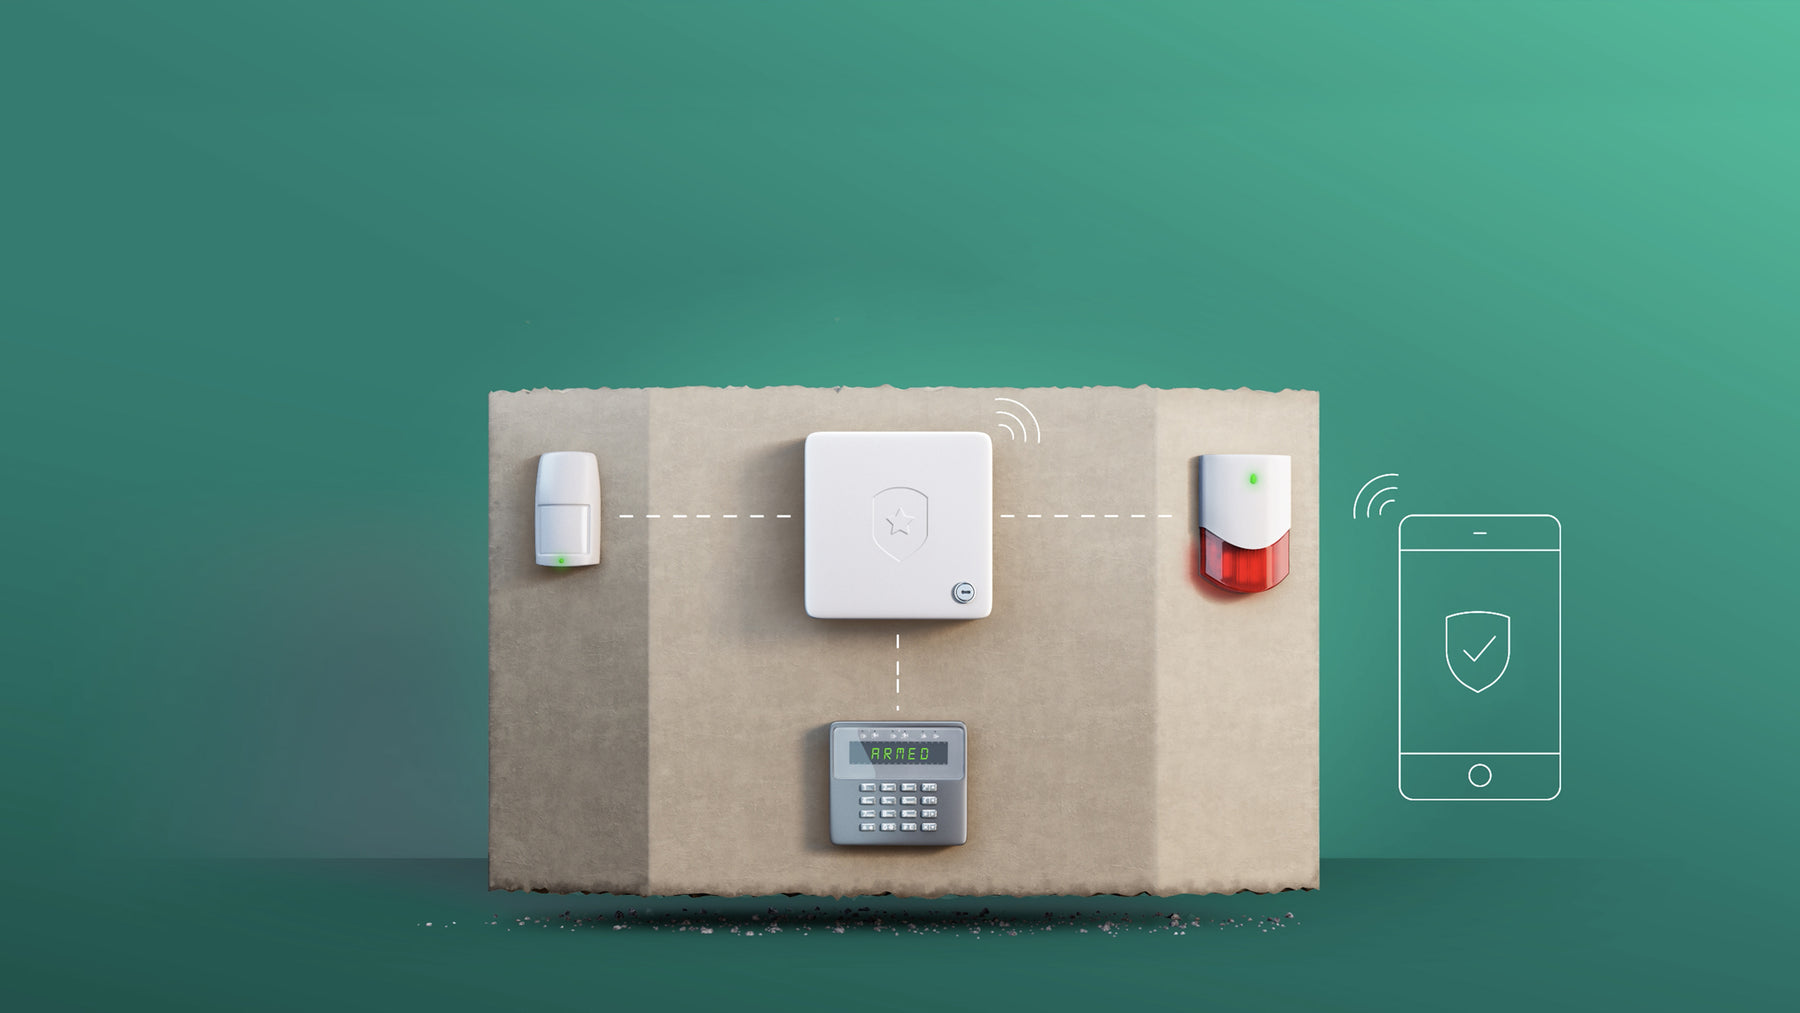 FIBARO Smart Home Implant, make electrical sensors smart, used with a pre-existing security system